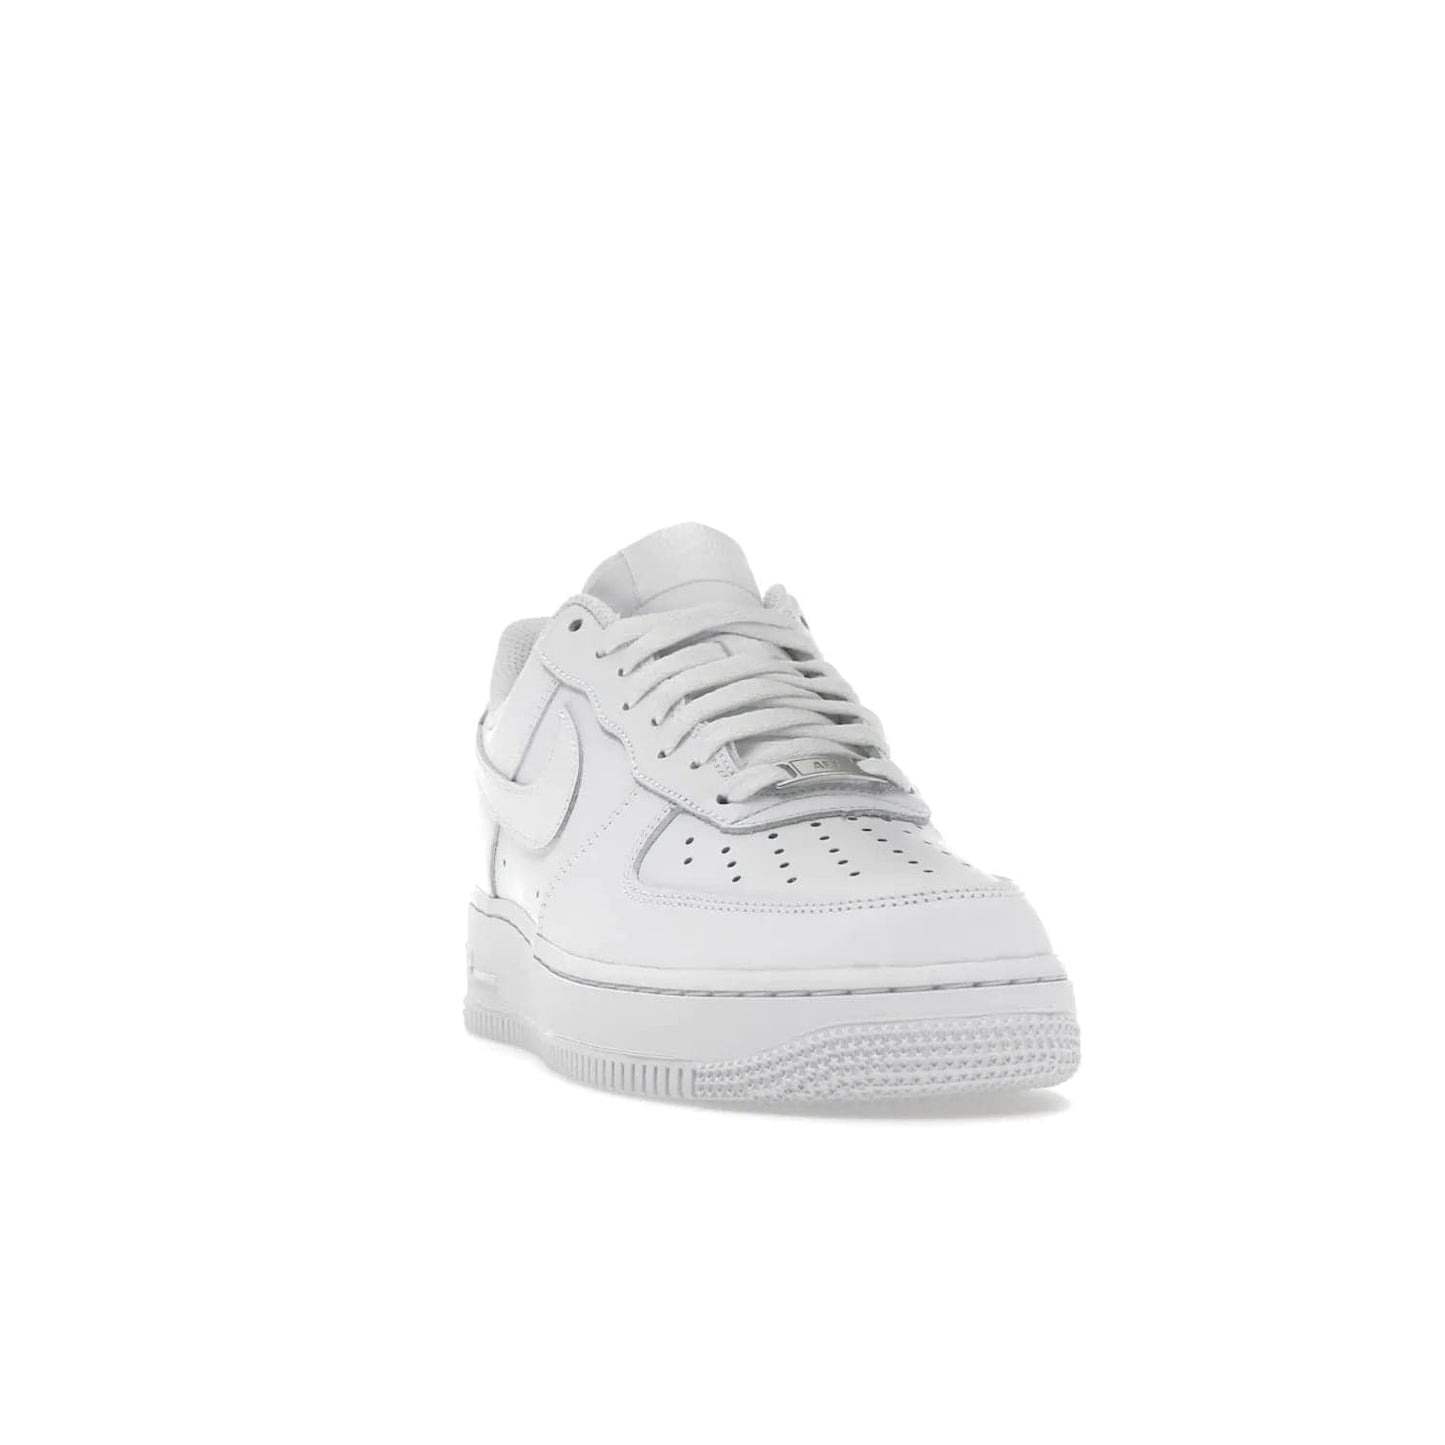 Nike Air Force 1 Low '07 White (Women's) - Image 8 - Only at www.BallersClubKickz.com - Timeless classic sneaker updated with white leather upper and perforated toe box. Nike heel embroidery and white sole. Released January 2018.